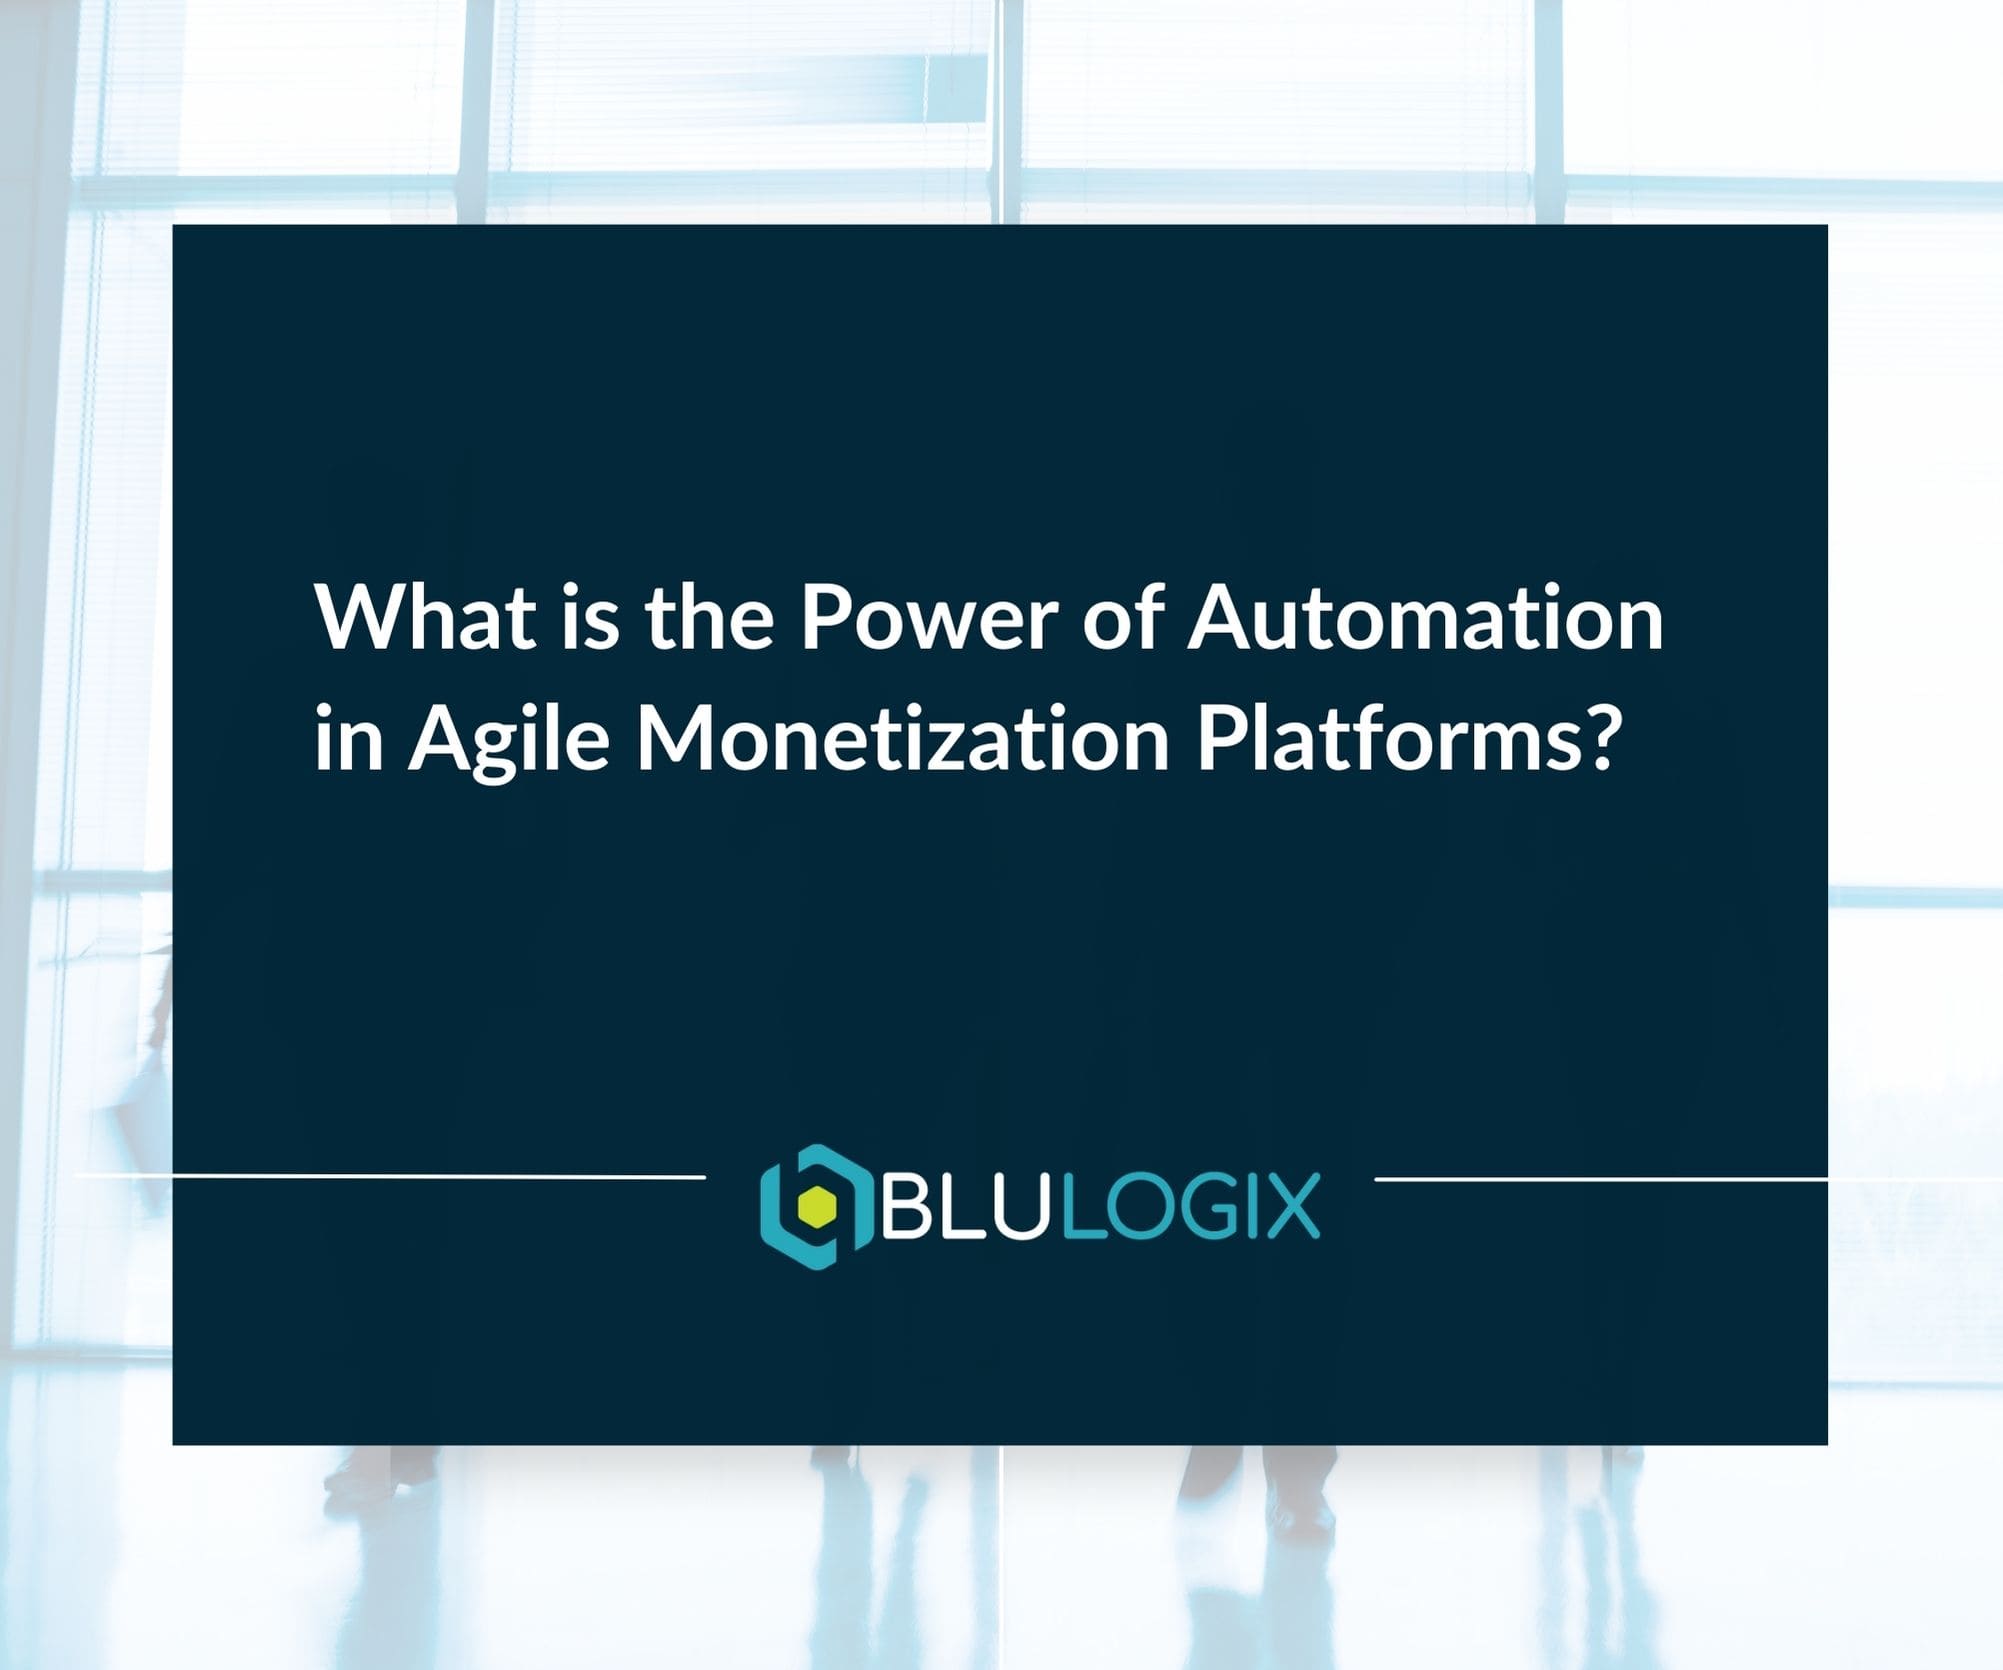 What is the Power of Automation in Agile Monetization Platforms